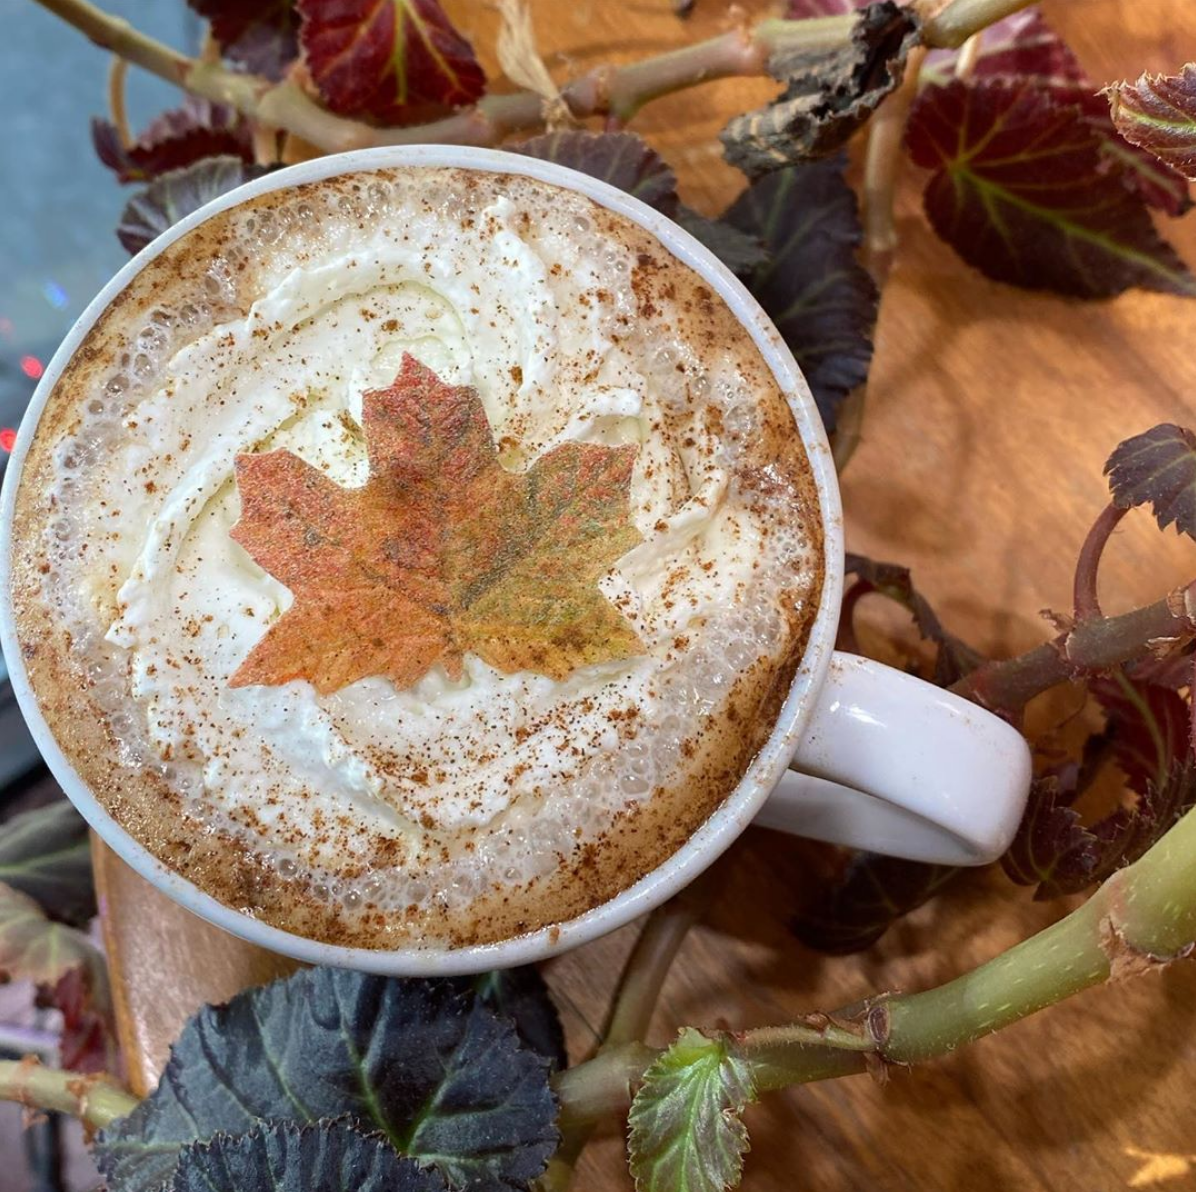 Maple Shortbread Latte at The Coffee House. (photo credit | Instagram @thecoffeehouselnk) 